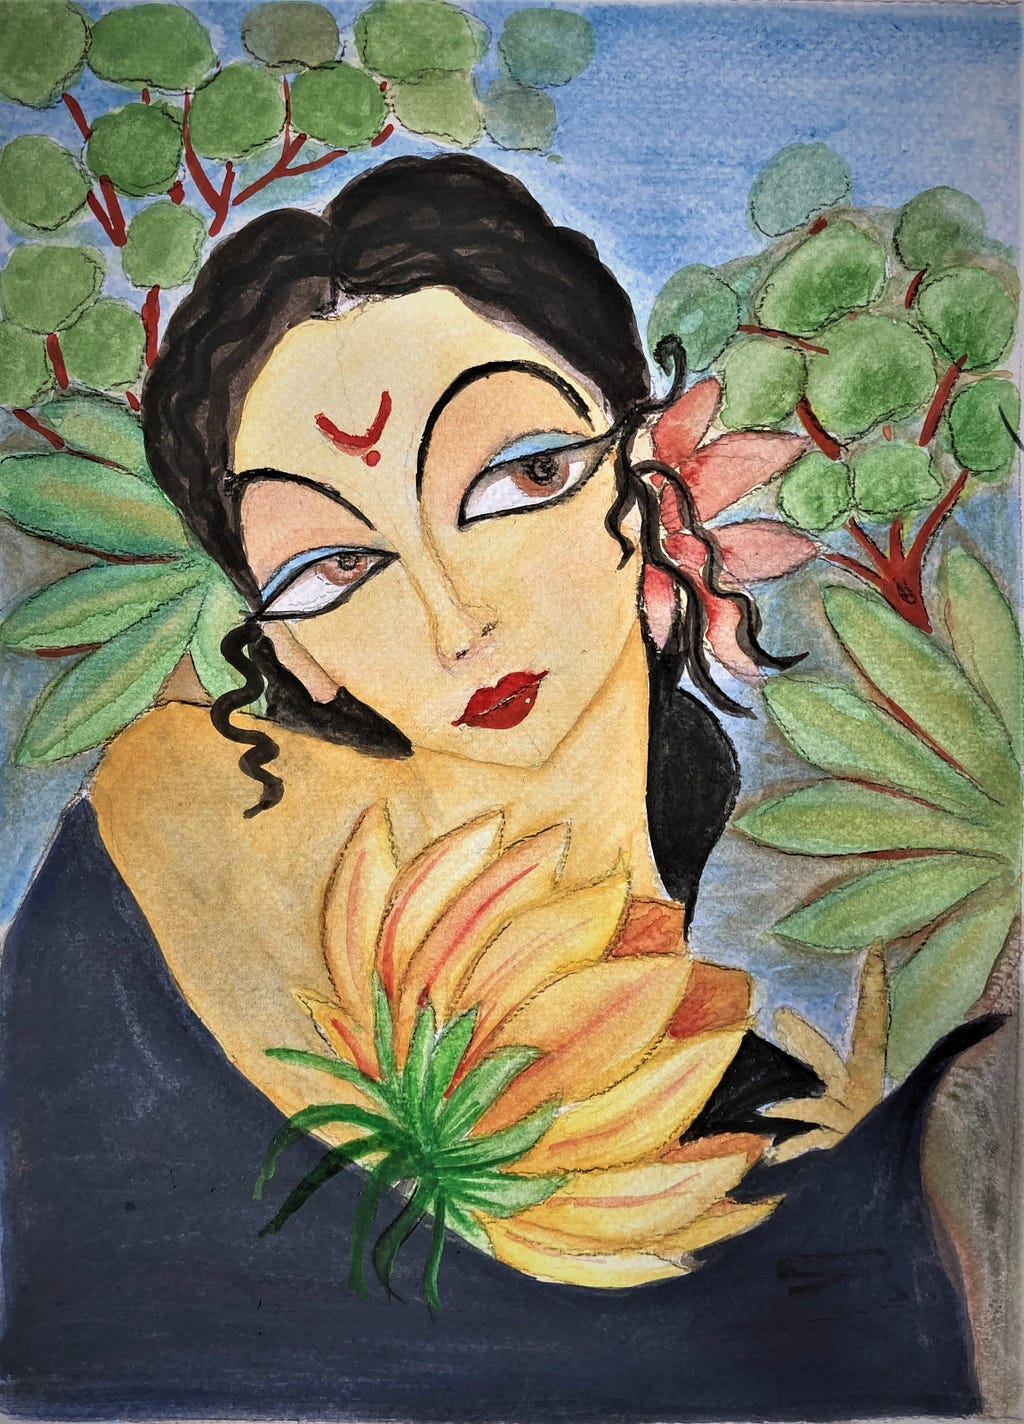 Recreation of an original art titled Essence of Emotions by Renuka Fulsounder. The piece depicts a lady with a flower in hand.